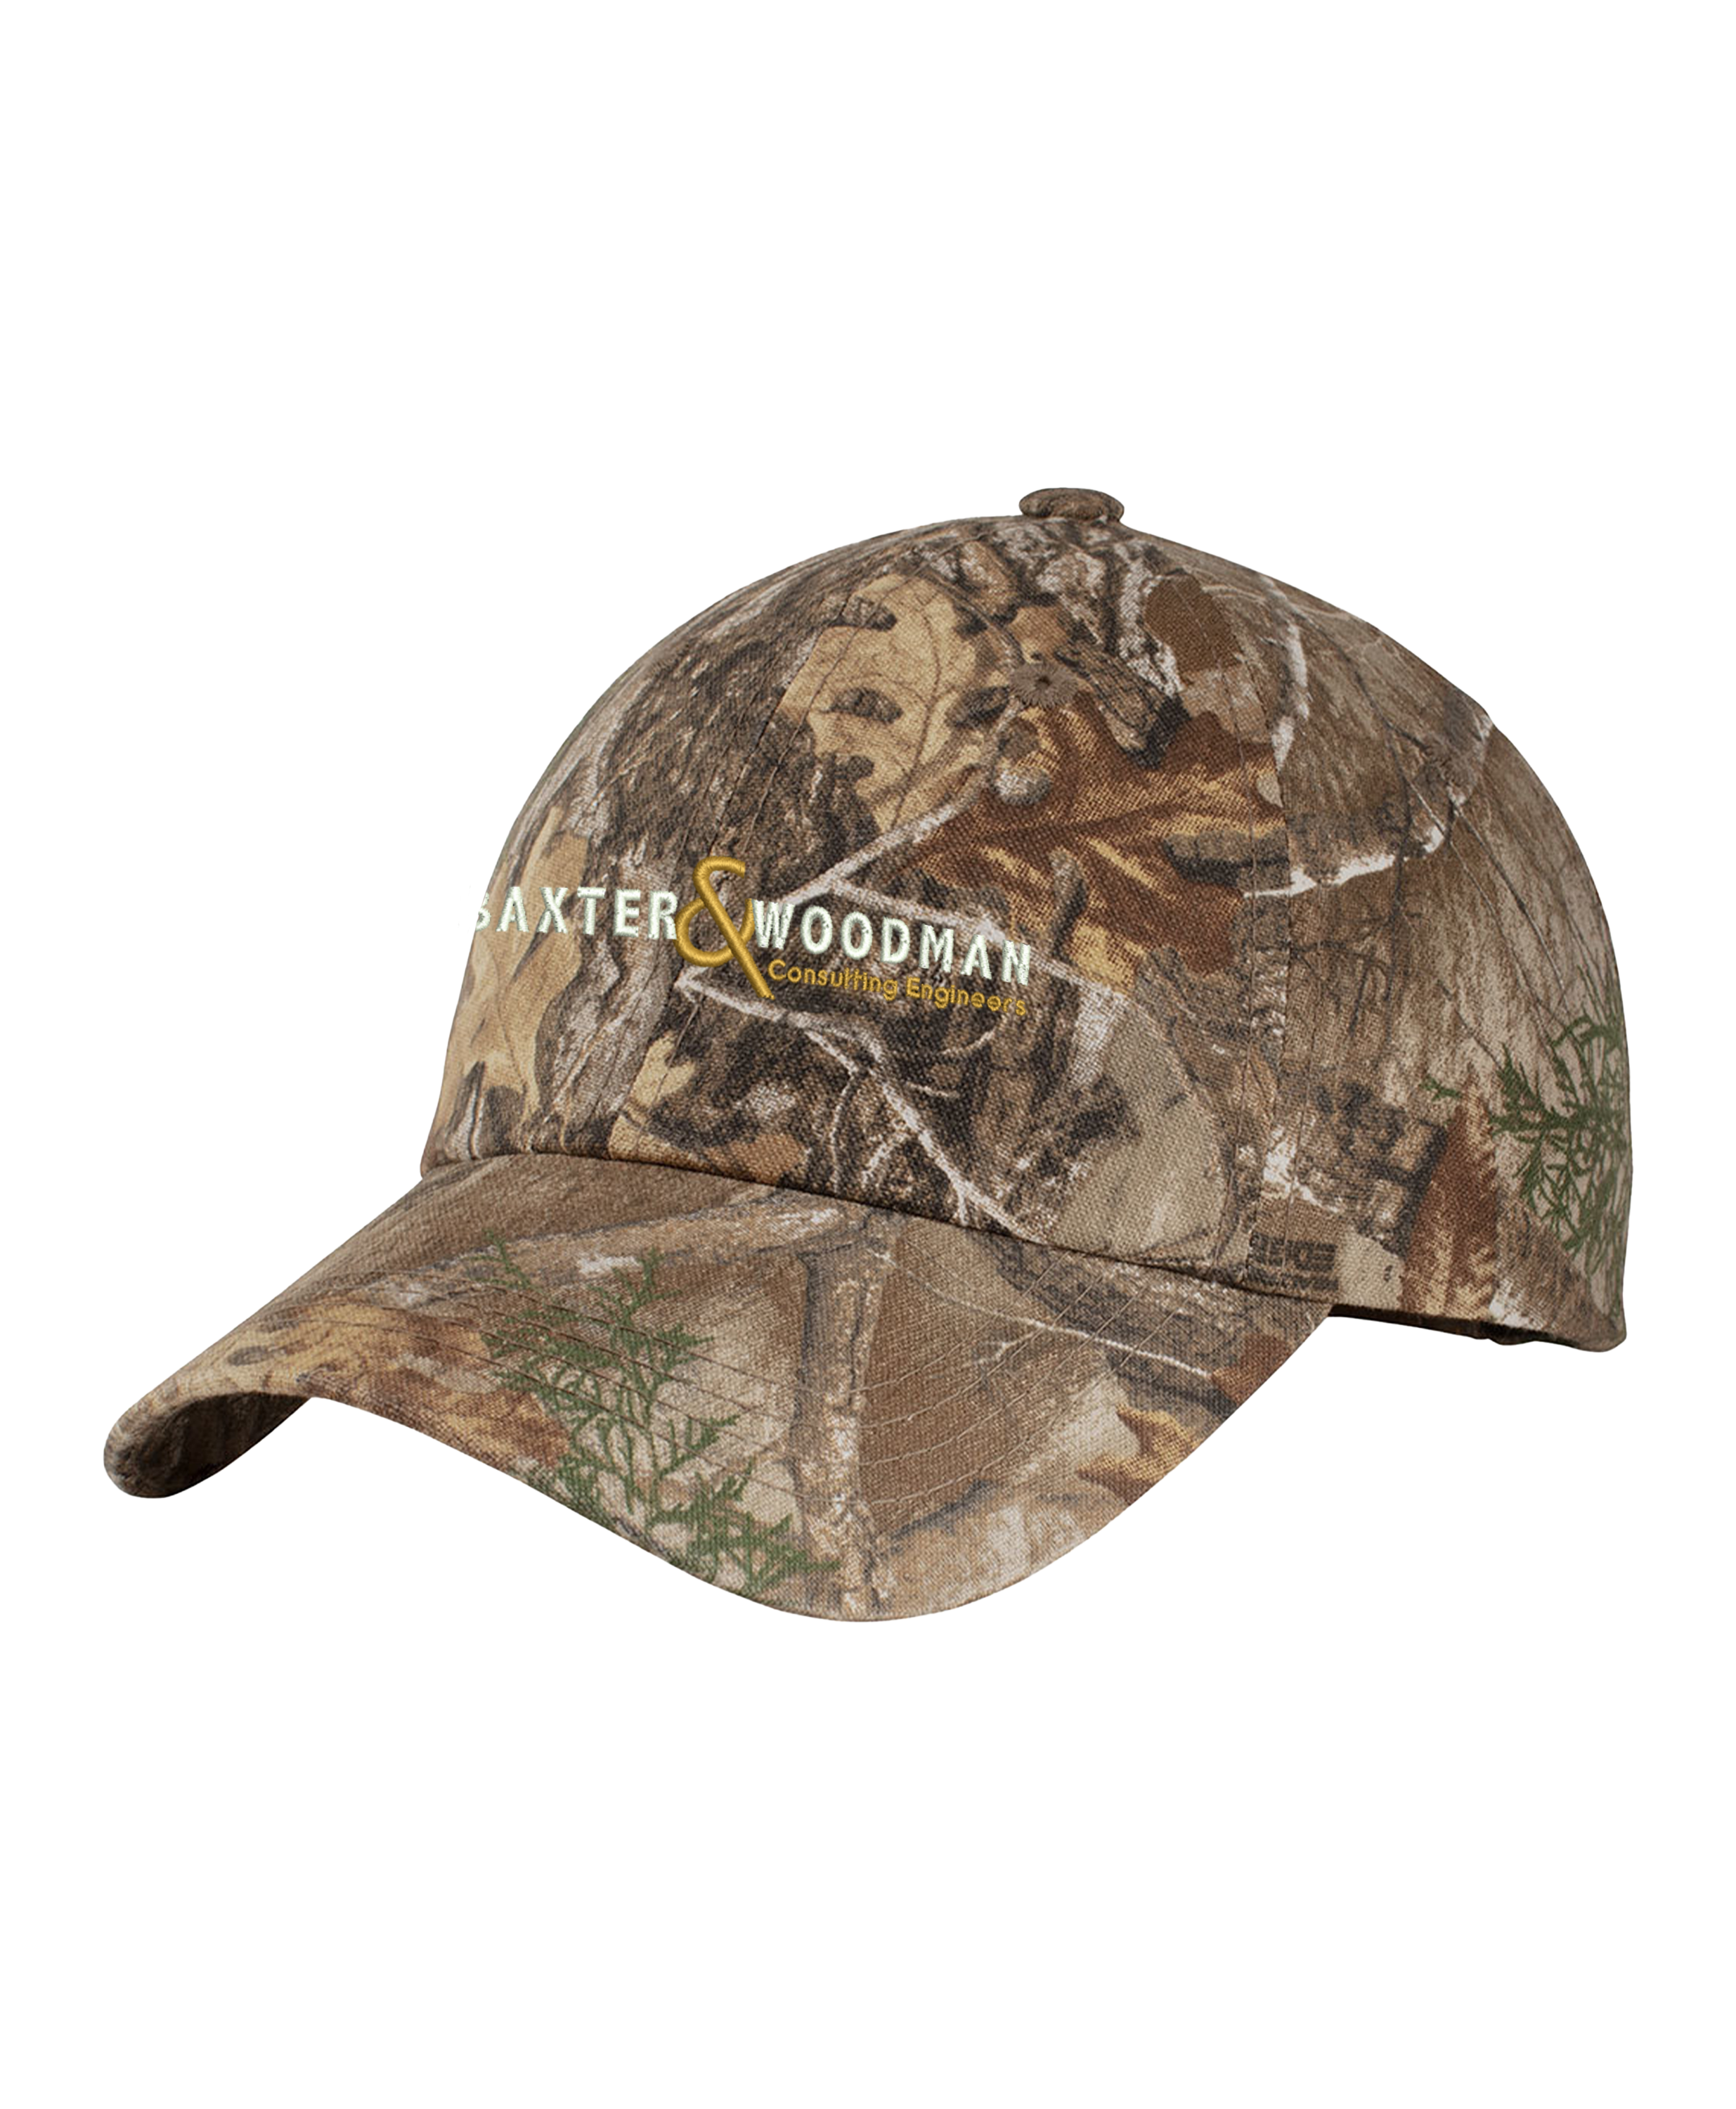 Port Authority® Pro Camouflage Series Garment-Washed Cap